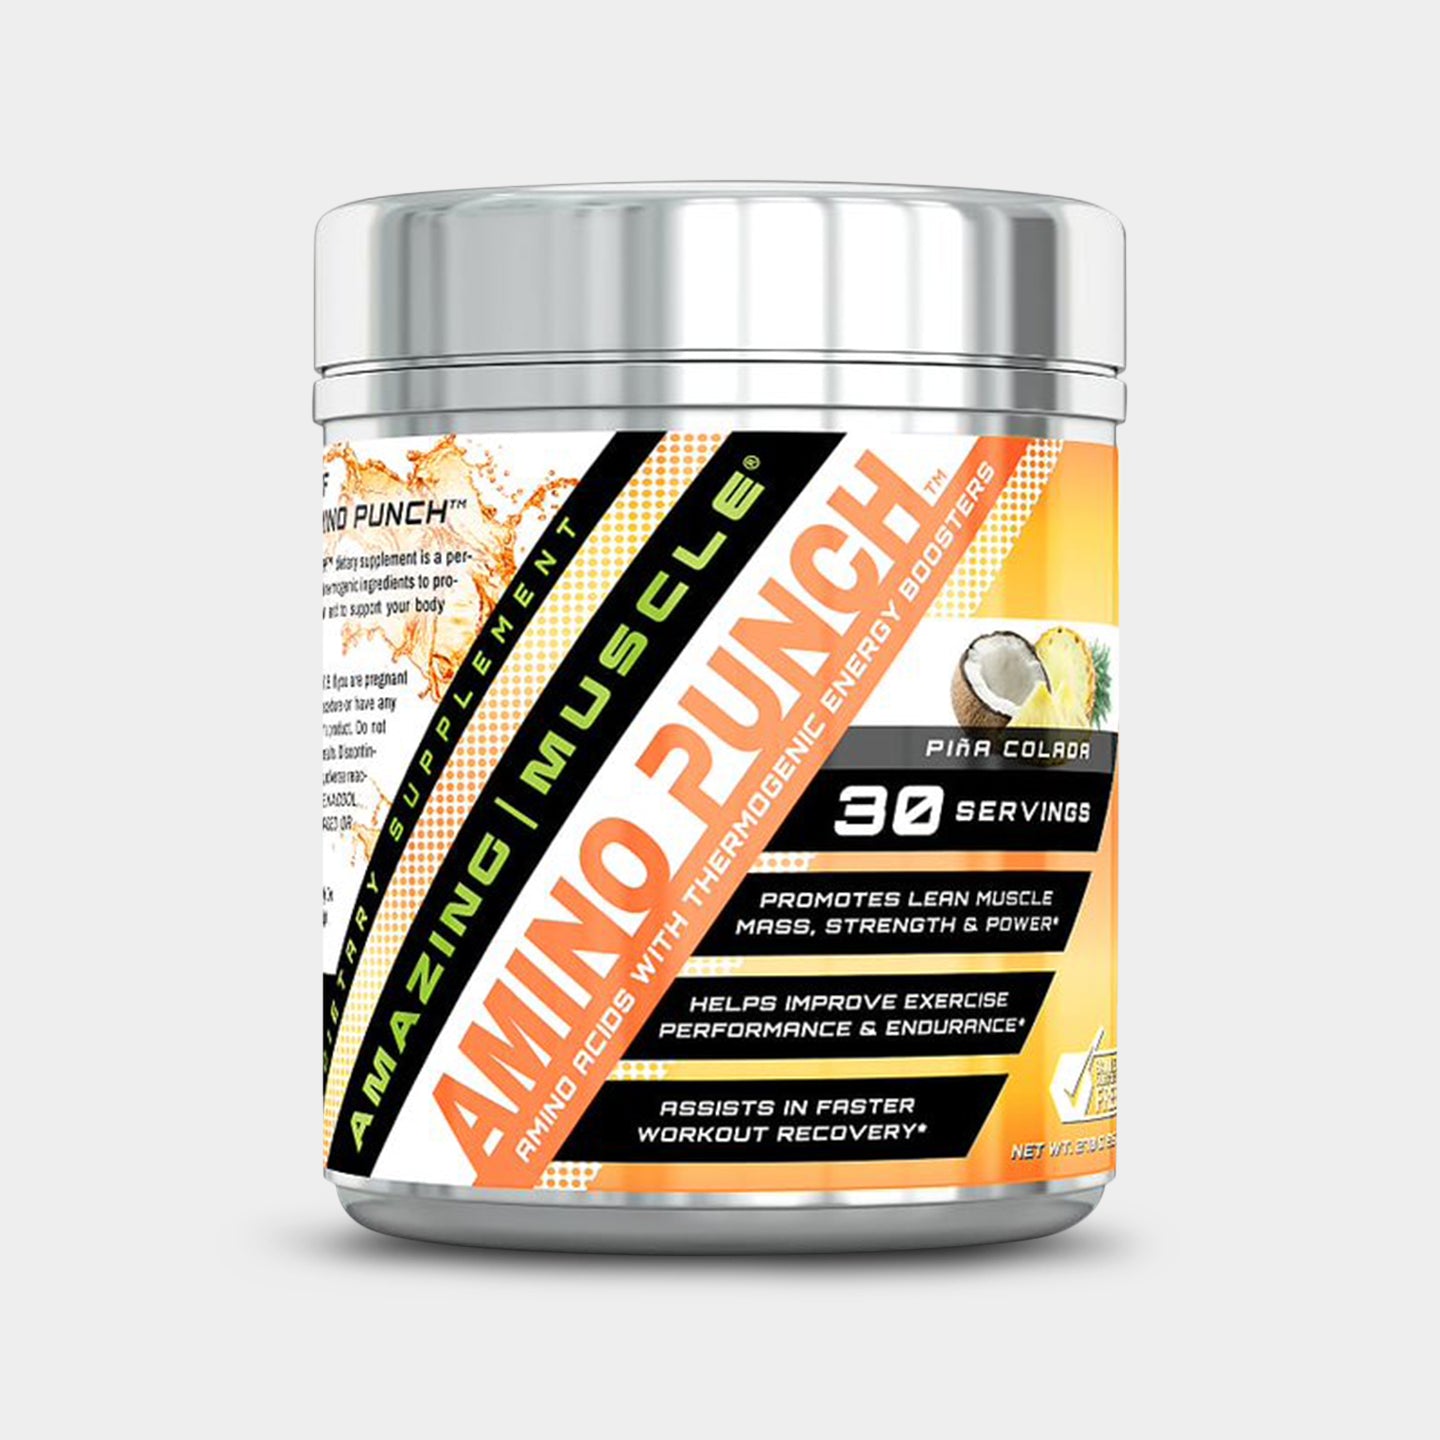 Amazing Muscle Amino Punch with Sucralose, Pina Colada, 30 Servings A1